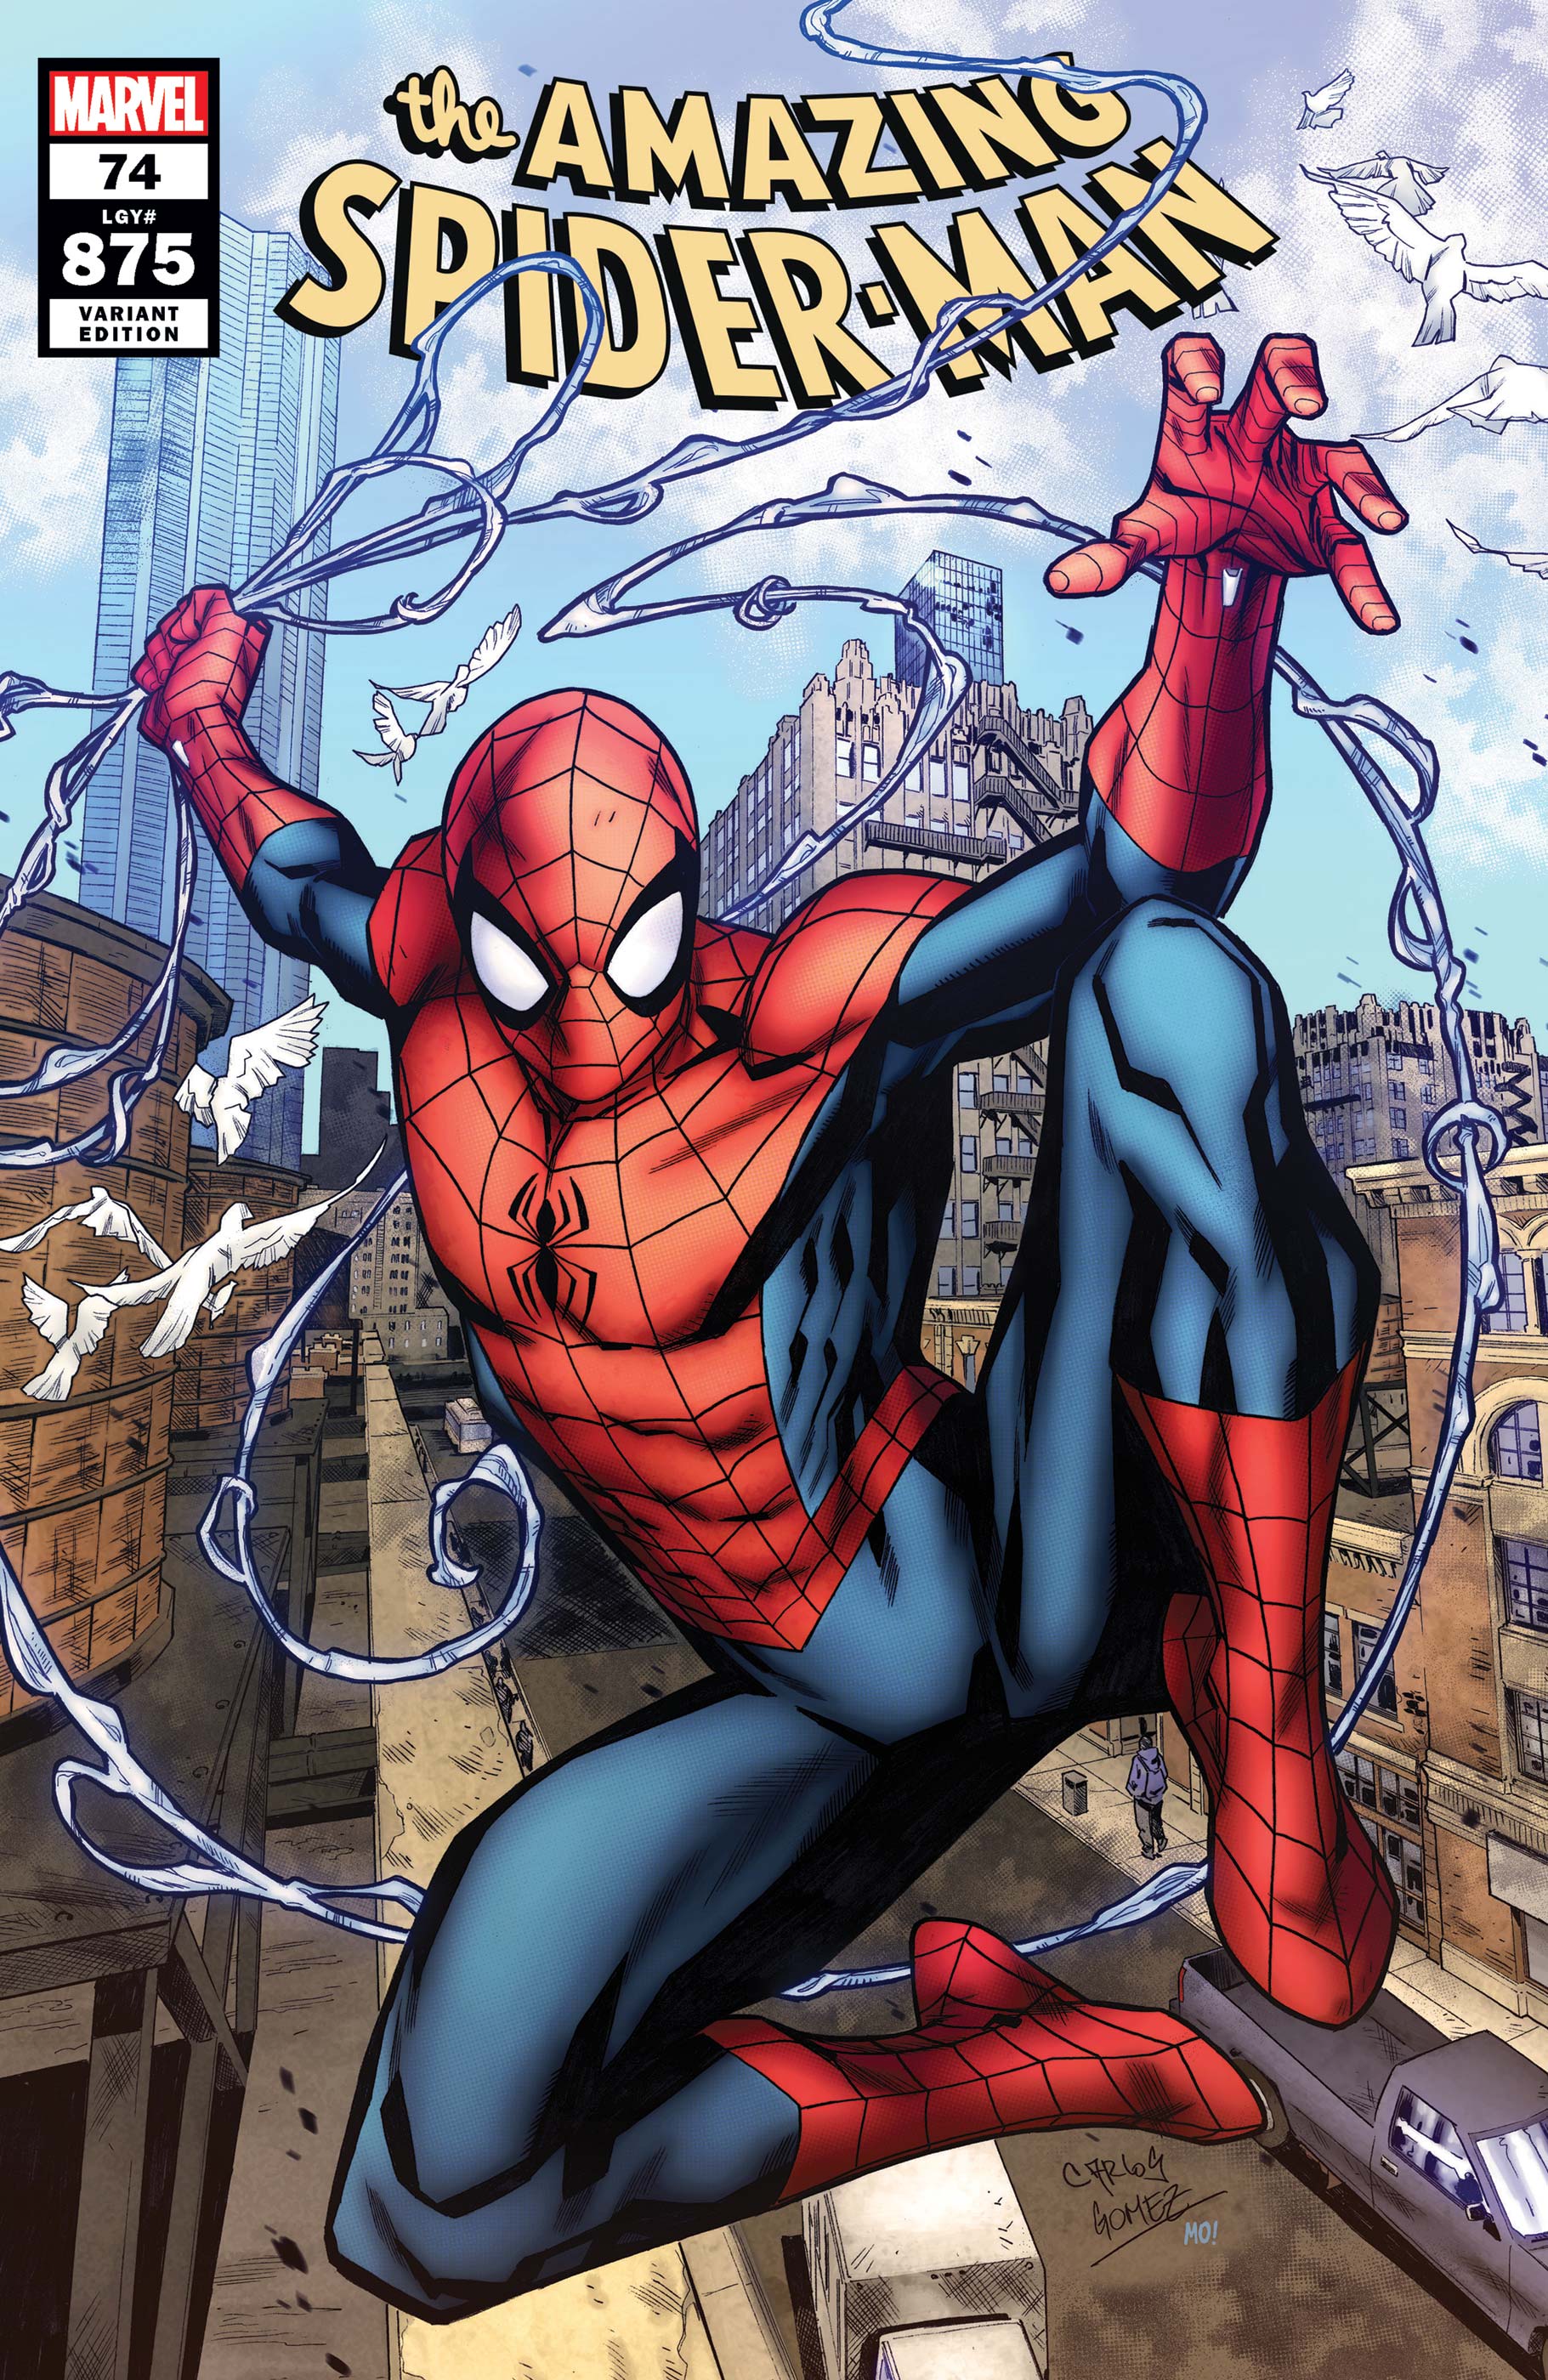 the amazing Spider-Man #74 アメコミ - 洋書